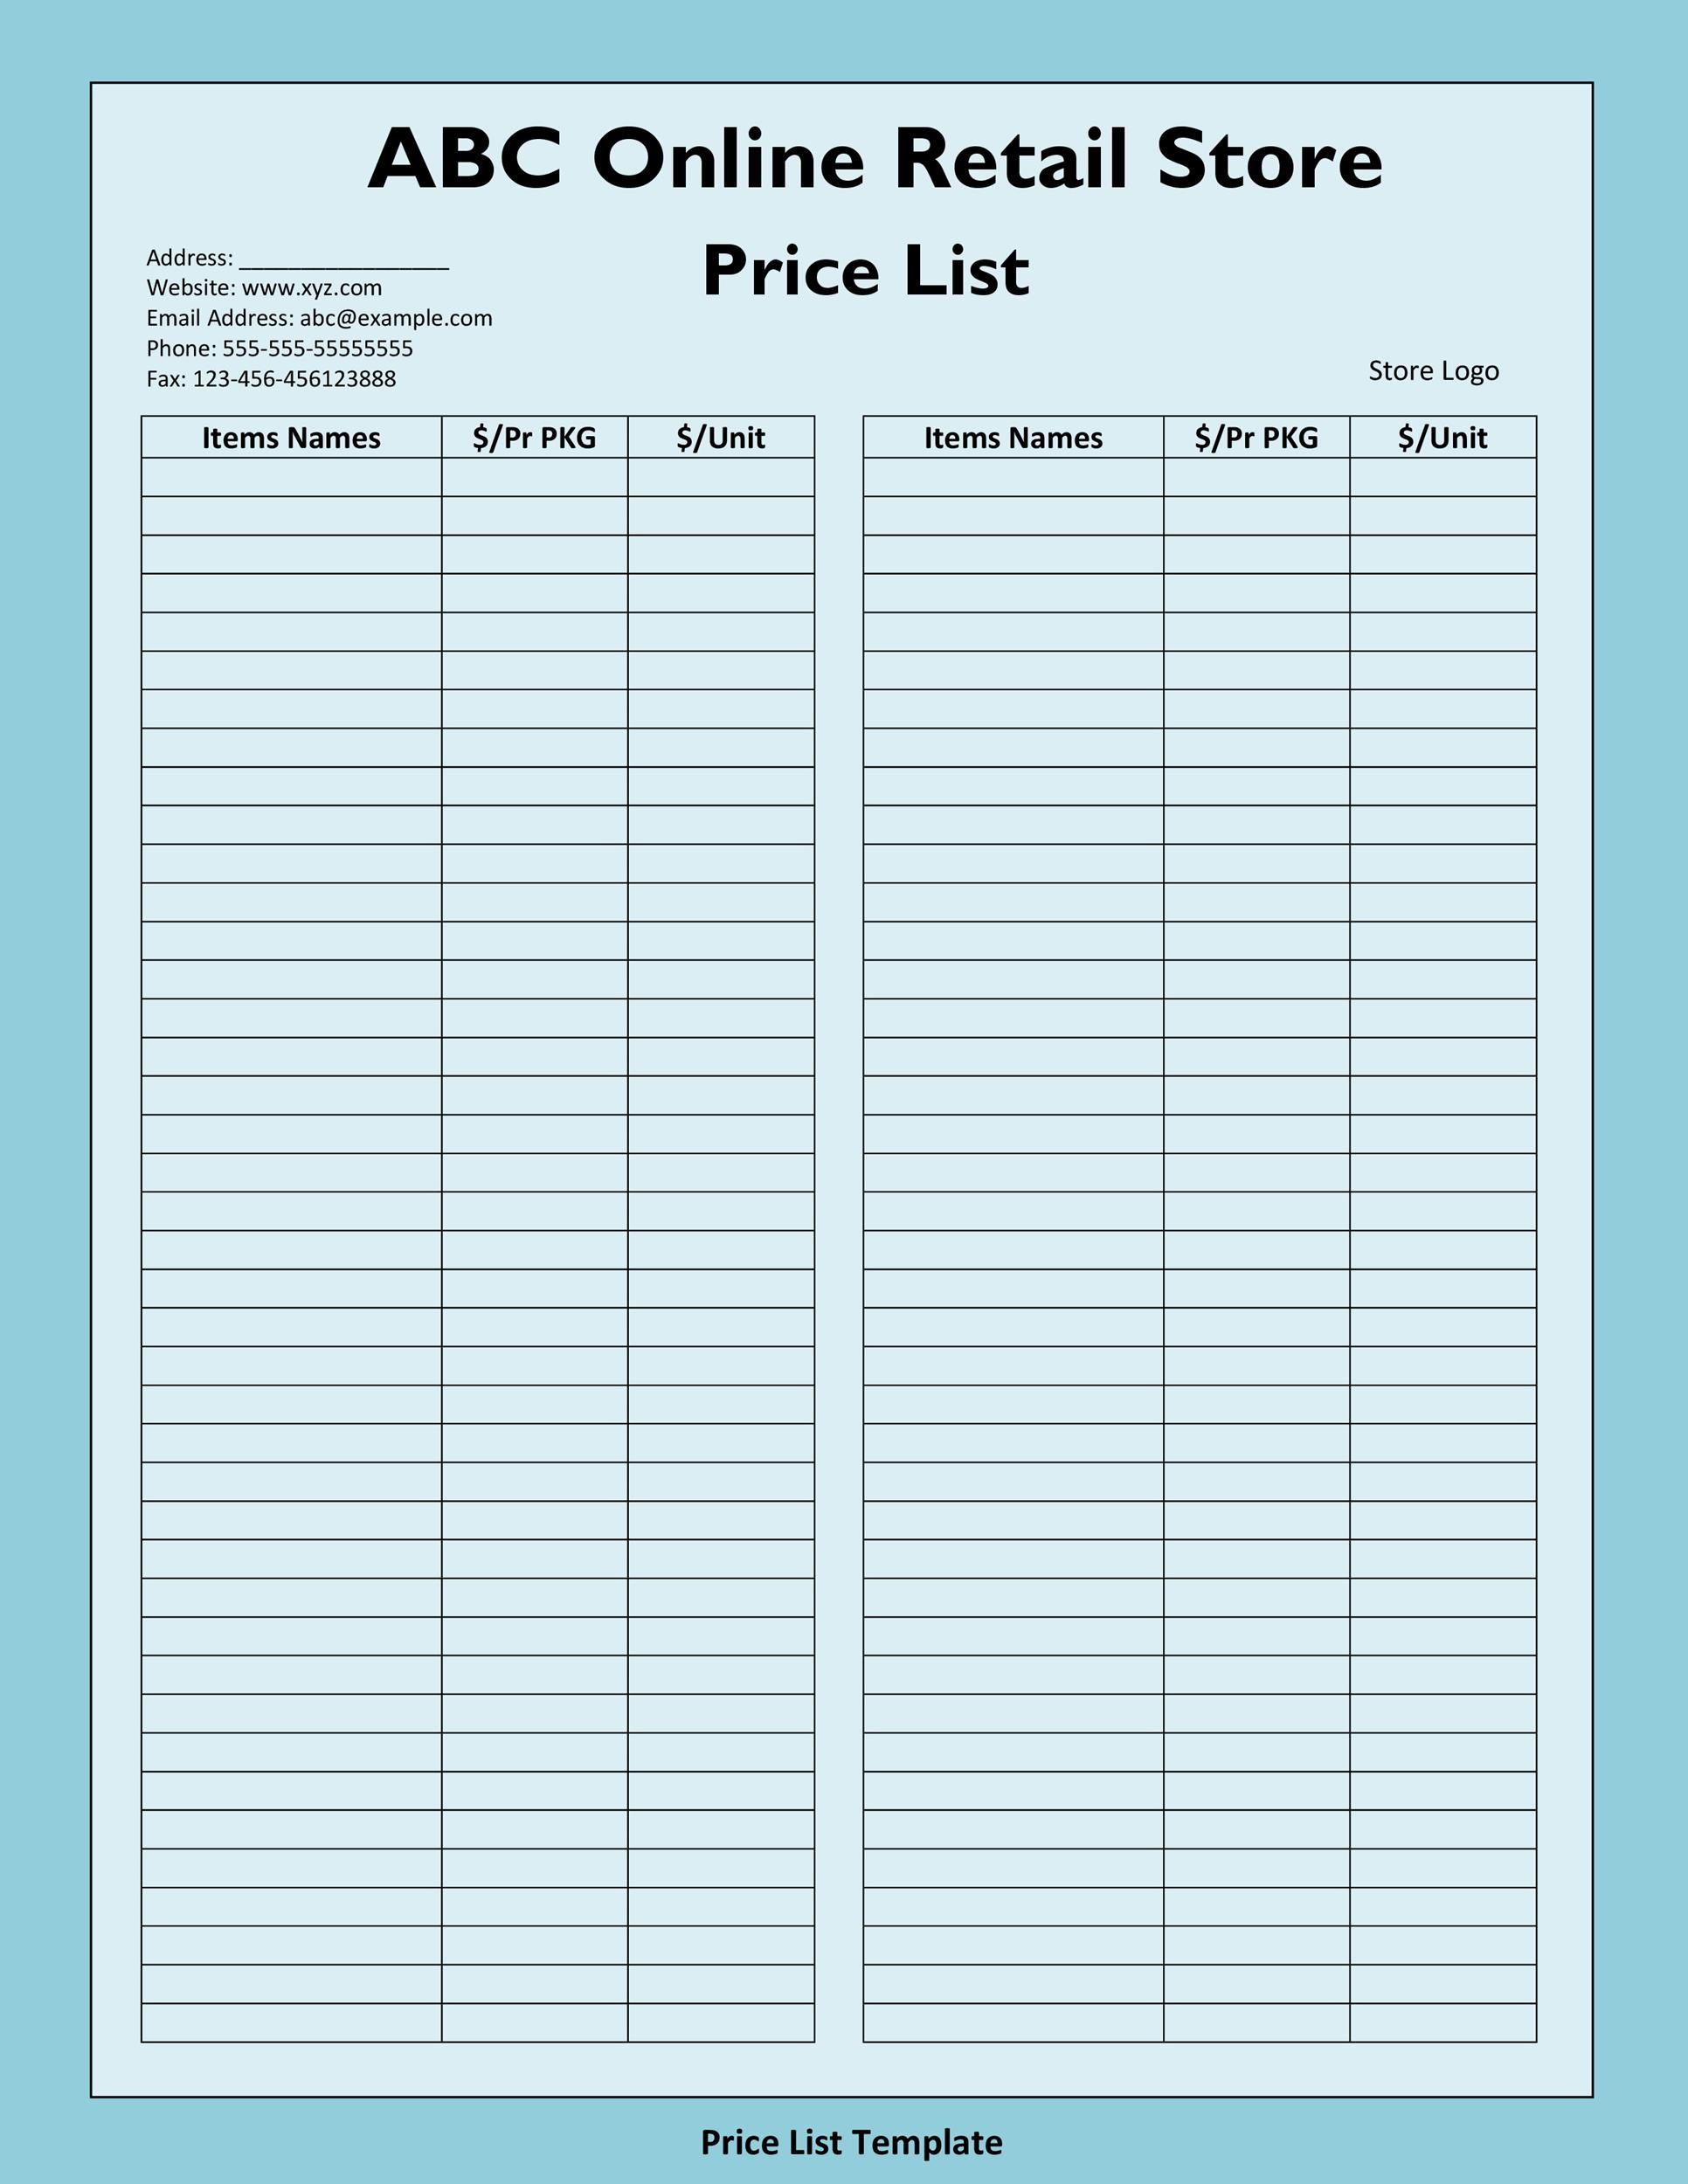 Grocery Store Price Comparison Chart